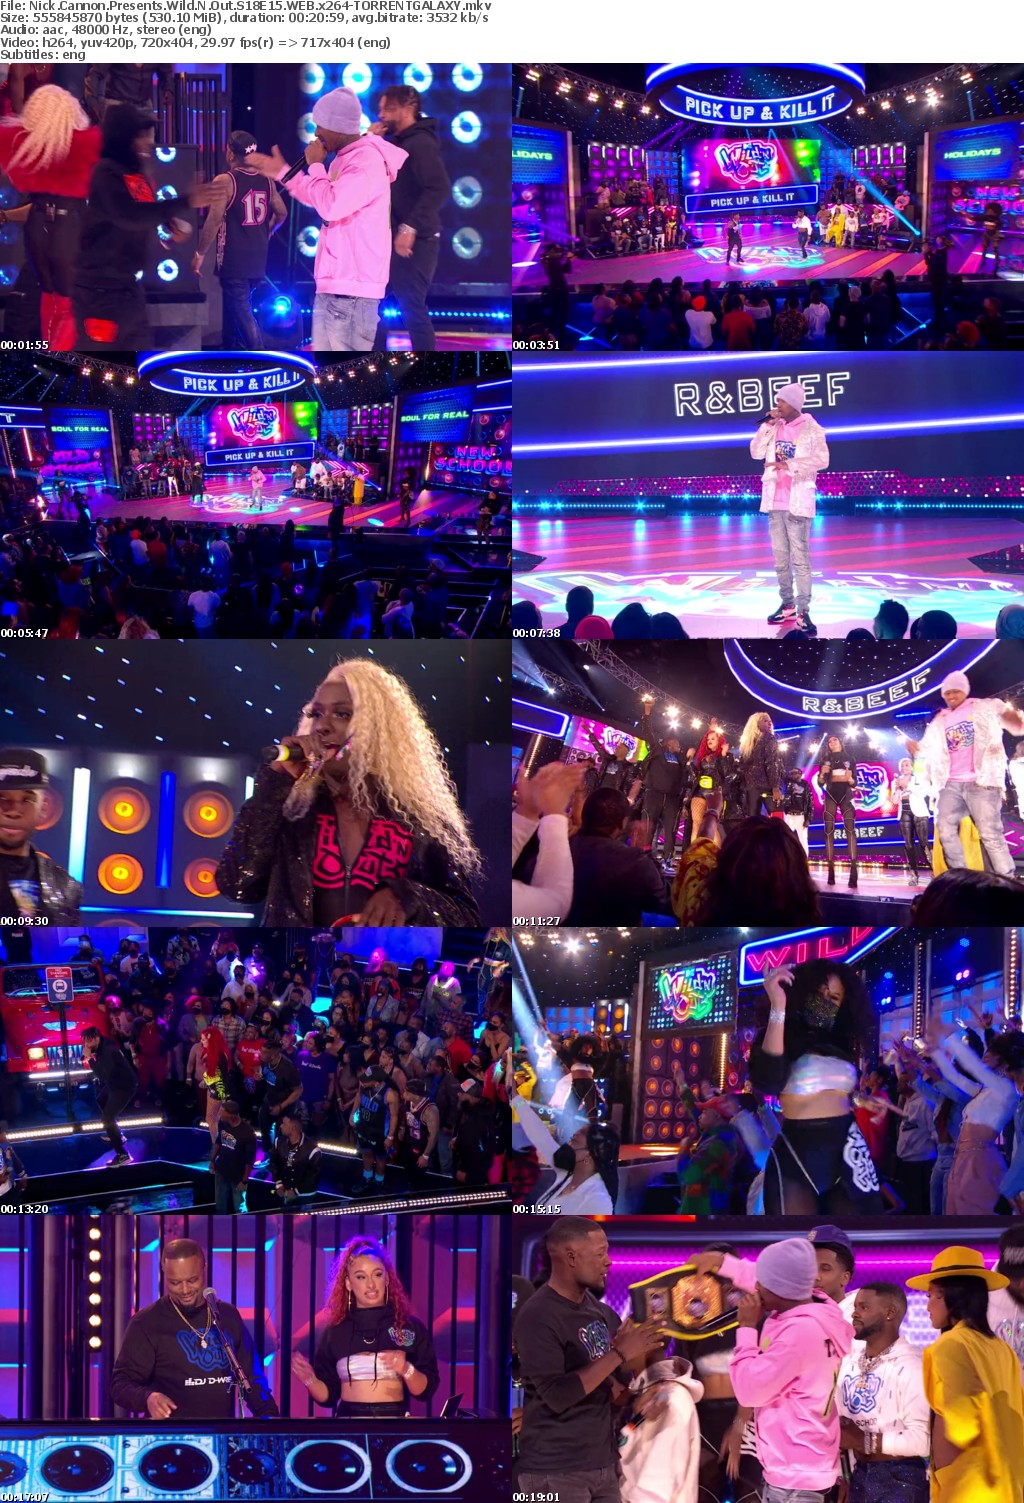 Nick Cannon Presents Wild N Out S18E15 WEB x264-GALAXY